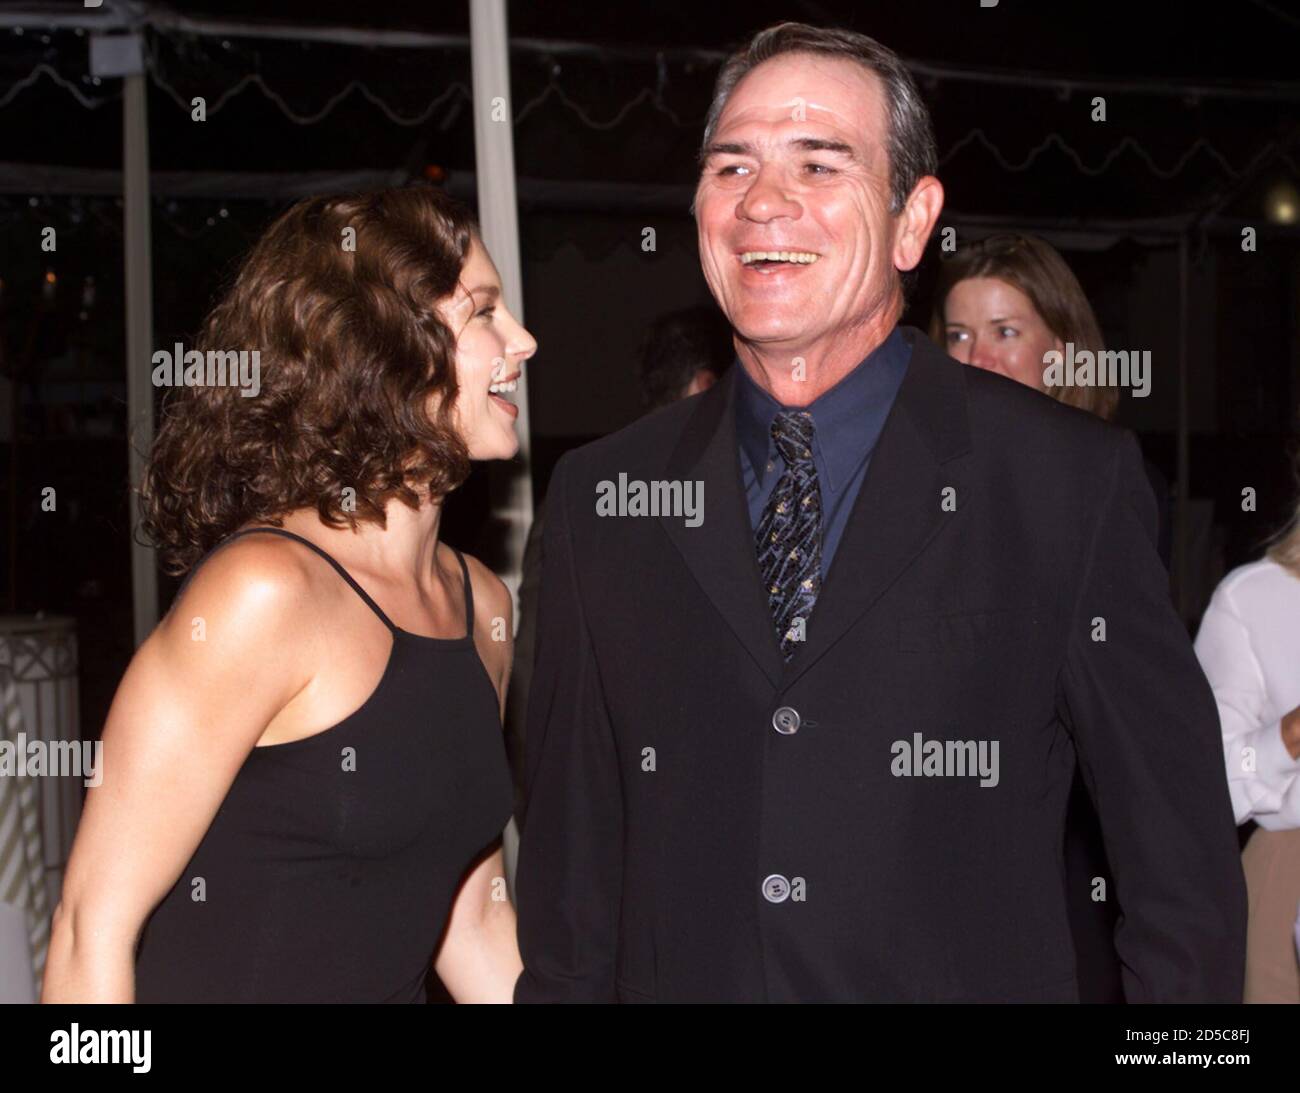 Actress Ashley Judd and Tommy Lee Jones, stars of the new drama film  "Double Jeopardy," pose at the film's premiere at Paramount Studios in  Hollywood, September 21. Judd stars as a woman